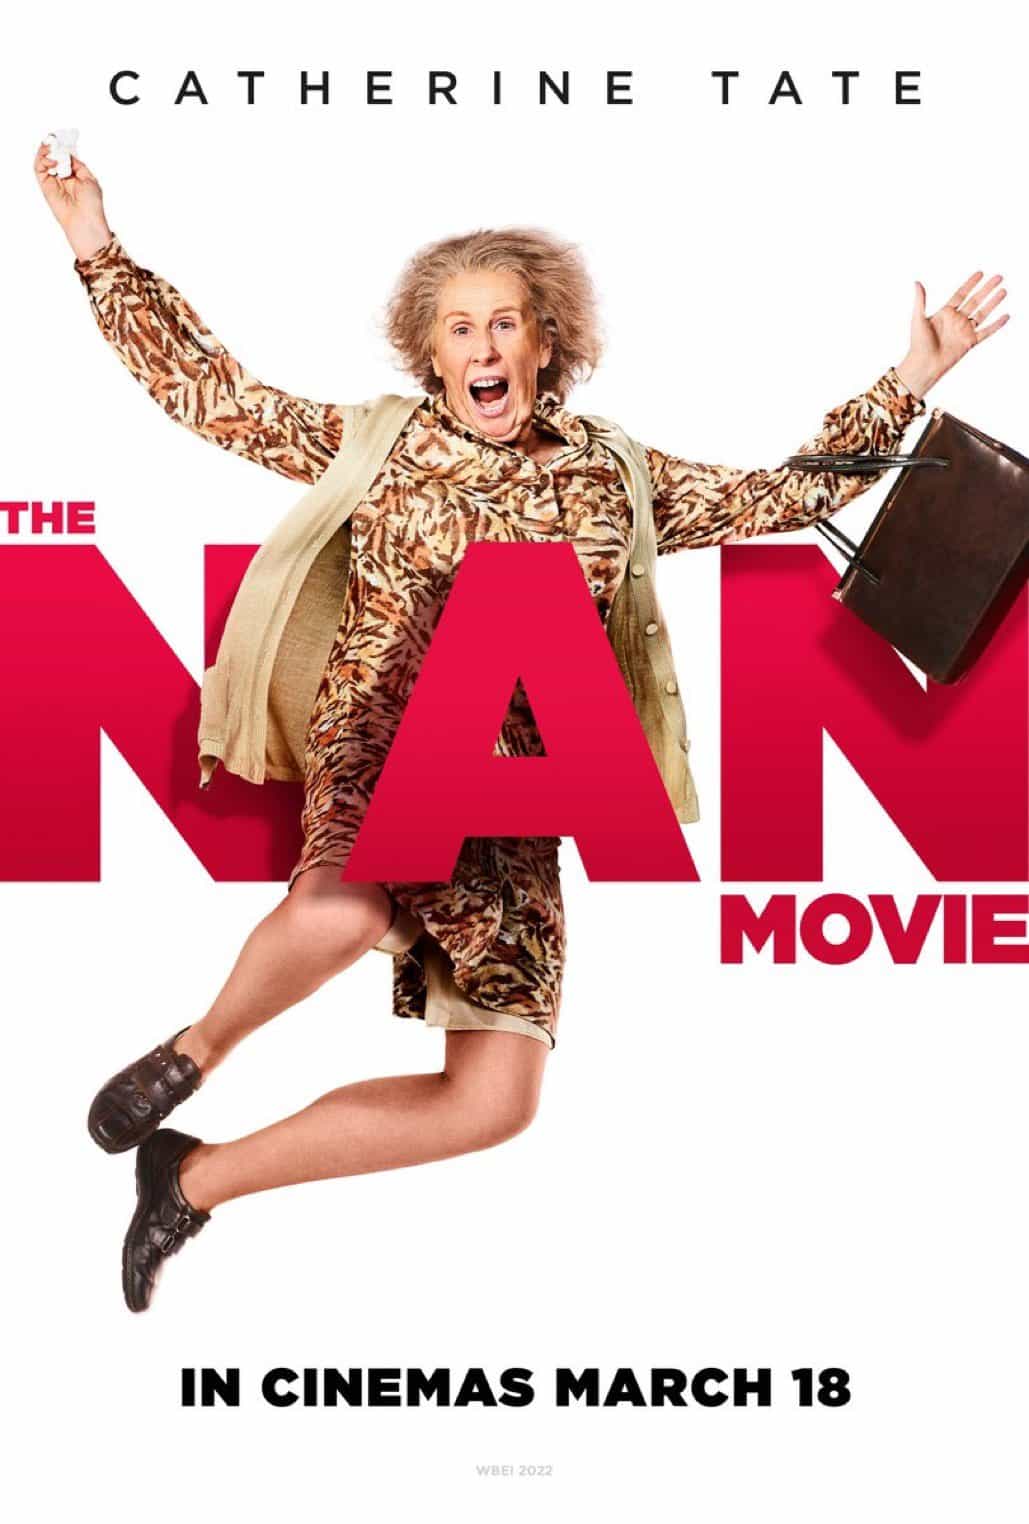 The Nan Movie is given a 15 age rating in the UK for very strong language, drug misuse